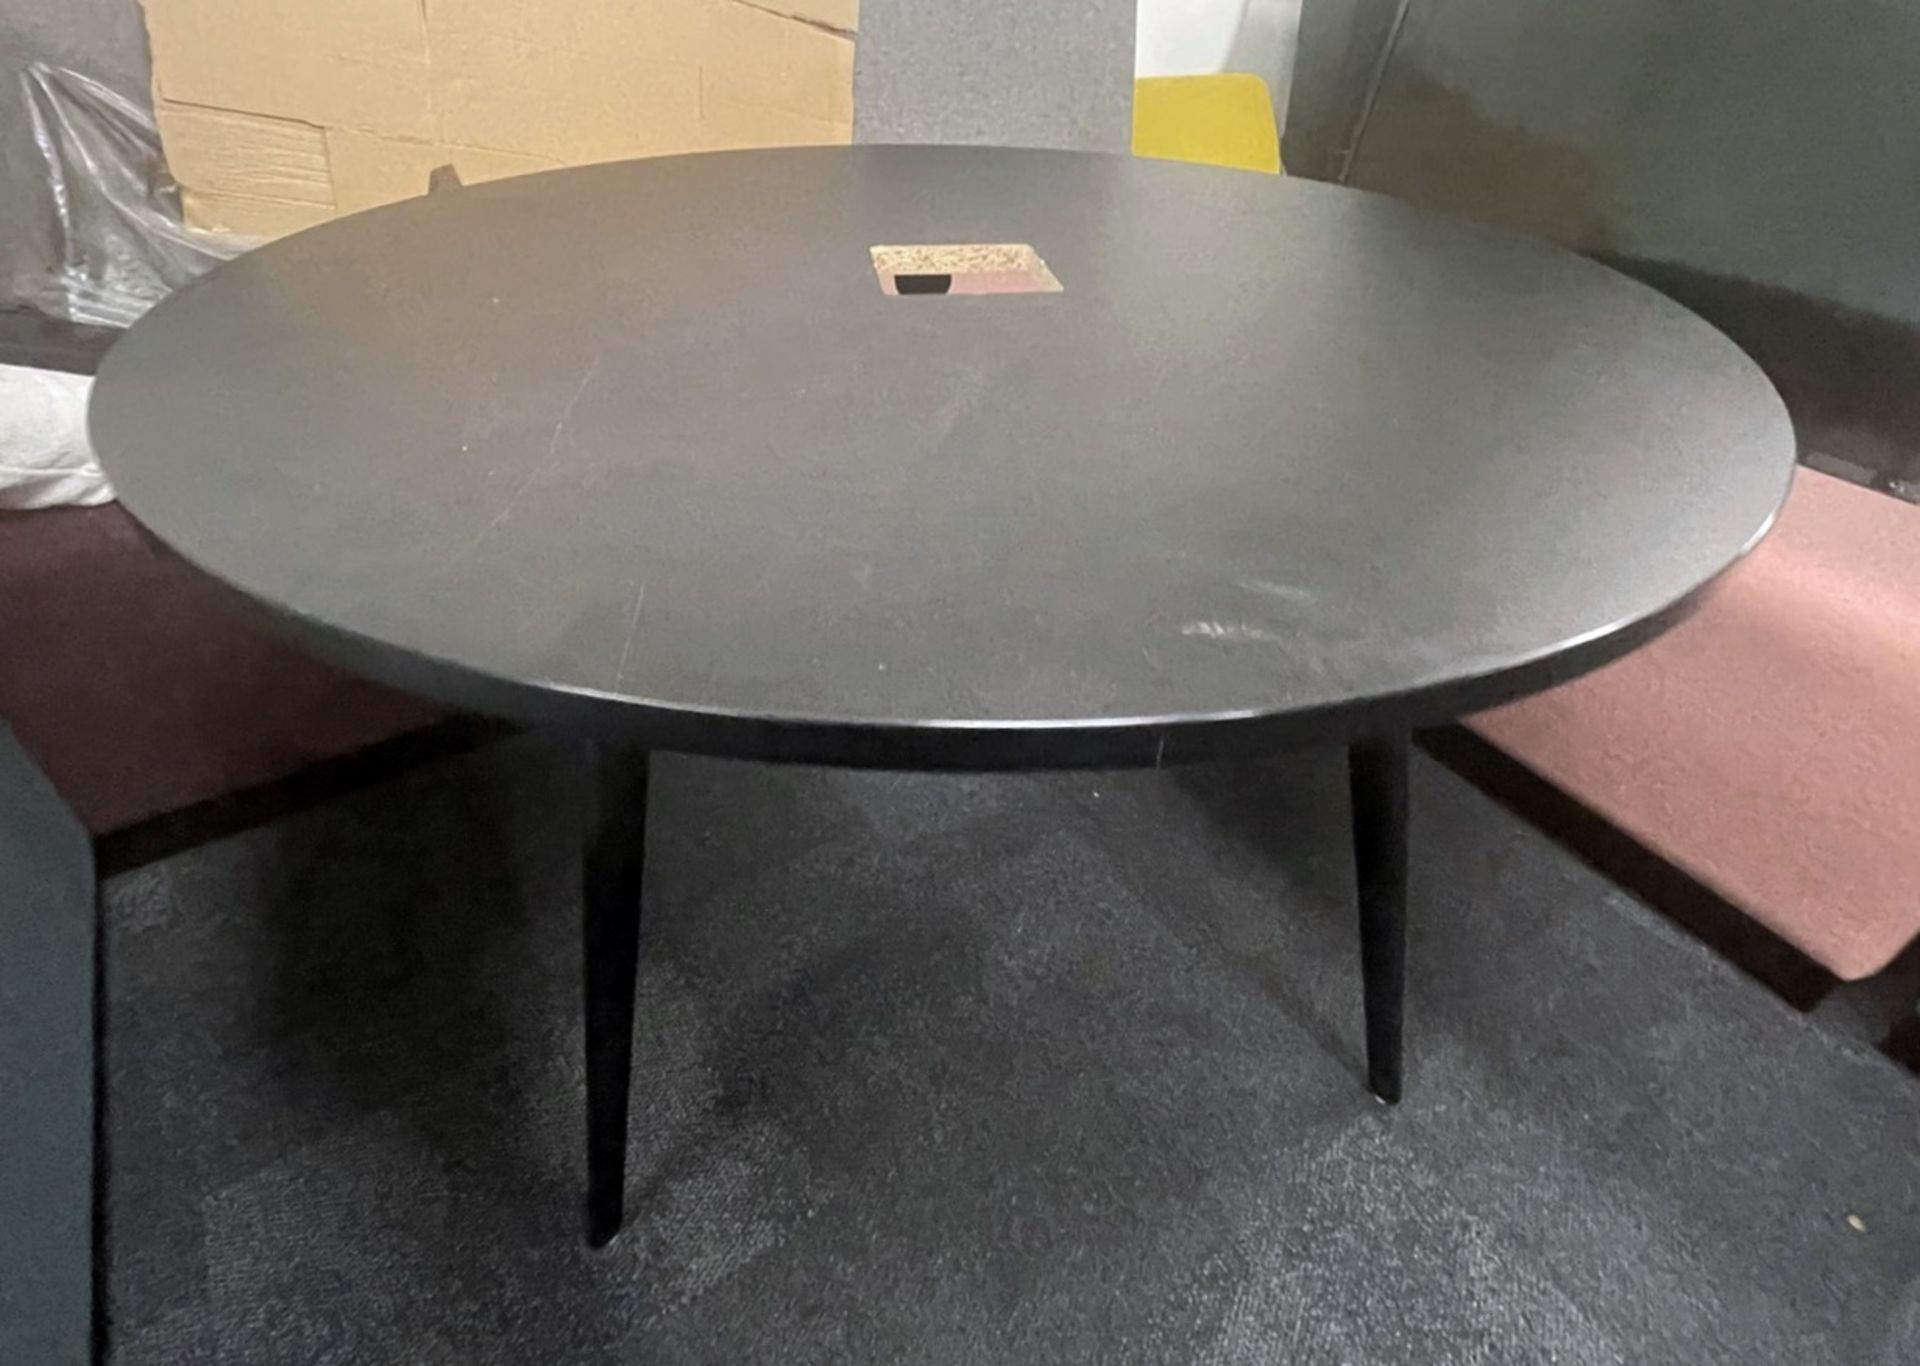 1 x Round 1.2-Metre Black Table With Centre Opening - To Be Removed From An Executive Office - Image 2 of 7